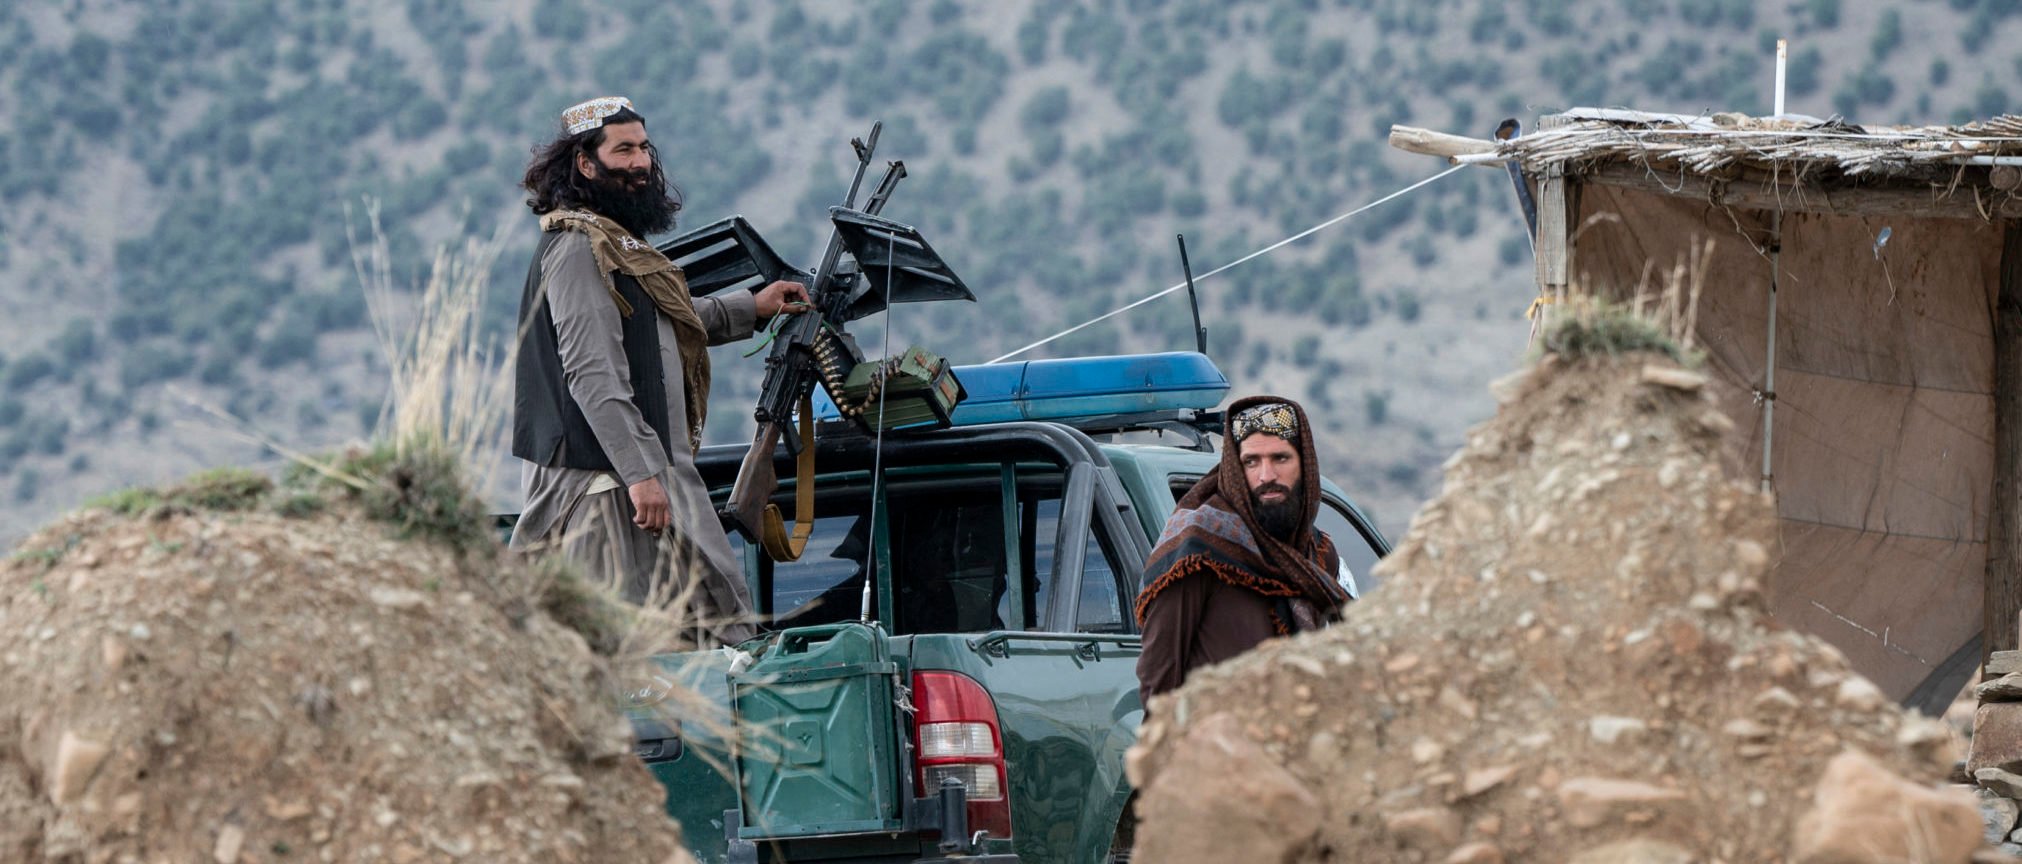 Taliban security personnel standing guard at an outpost in the Zambar area of Sabari district. (Photo by WAKIL KOHSAR/AFP via Getty Images)